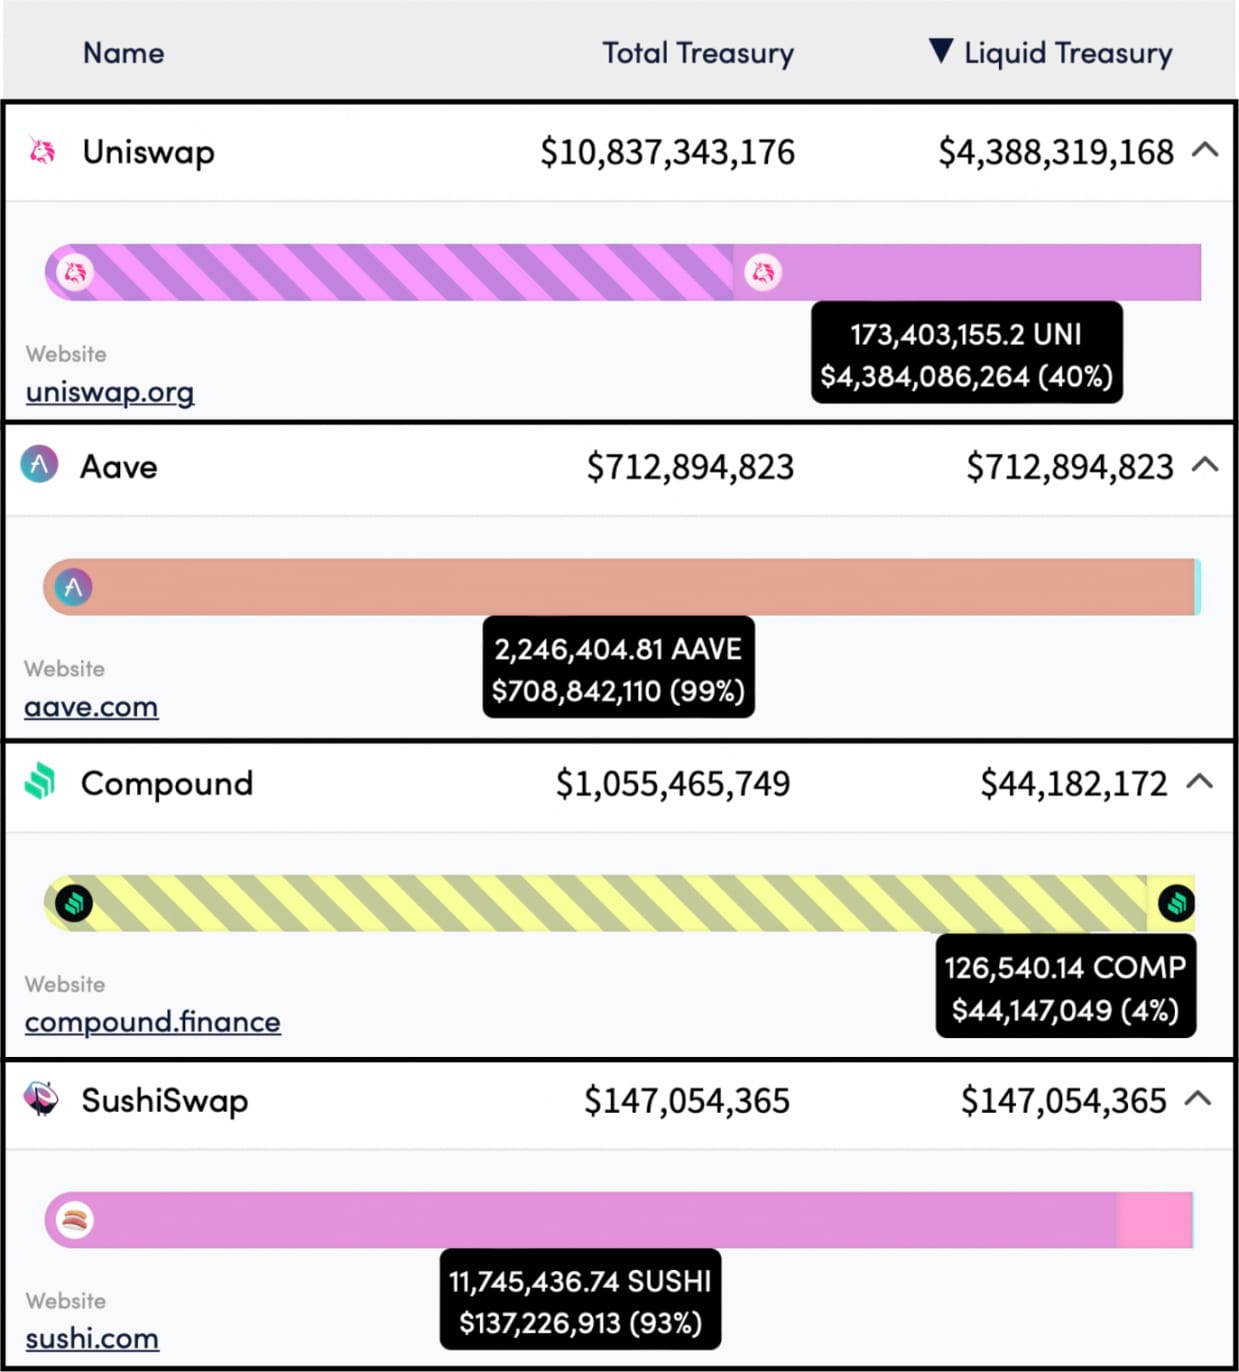 Infographic showing DAO treasury holding for Uniswap Aave Compound and Sushiswap